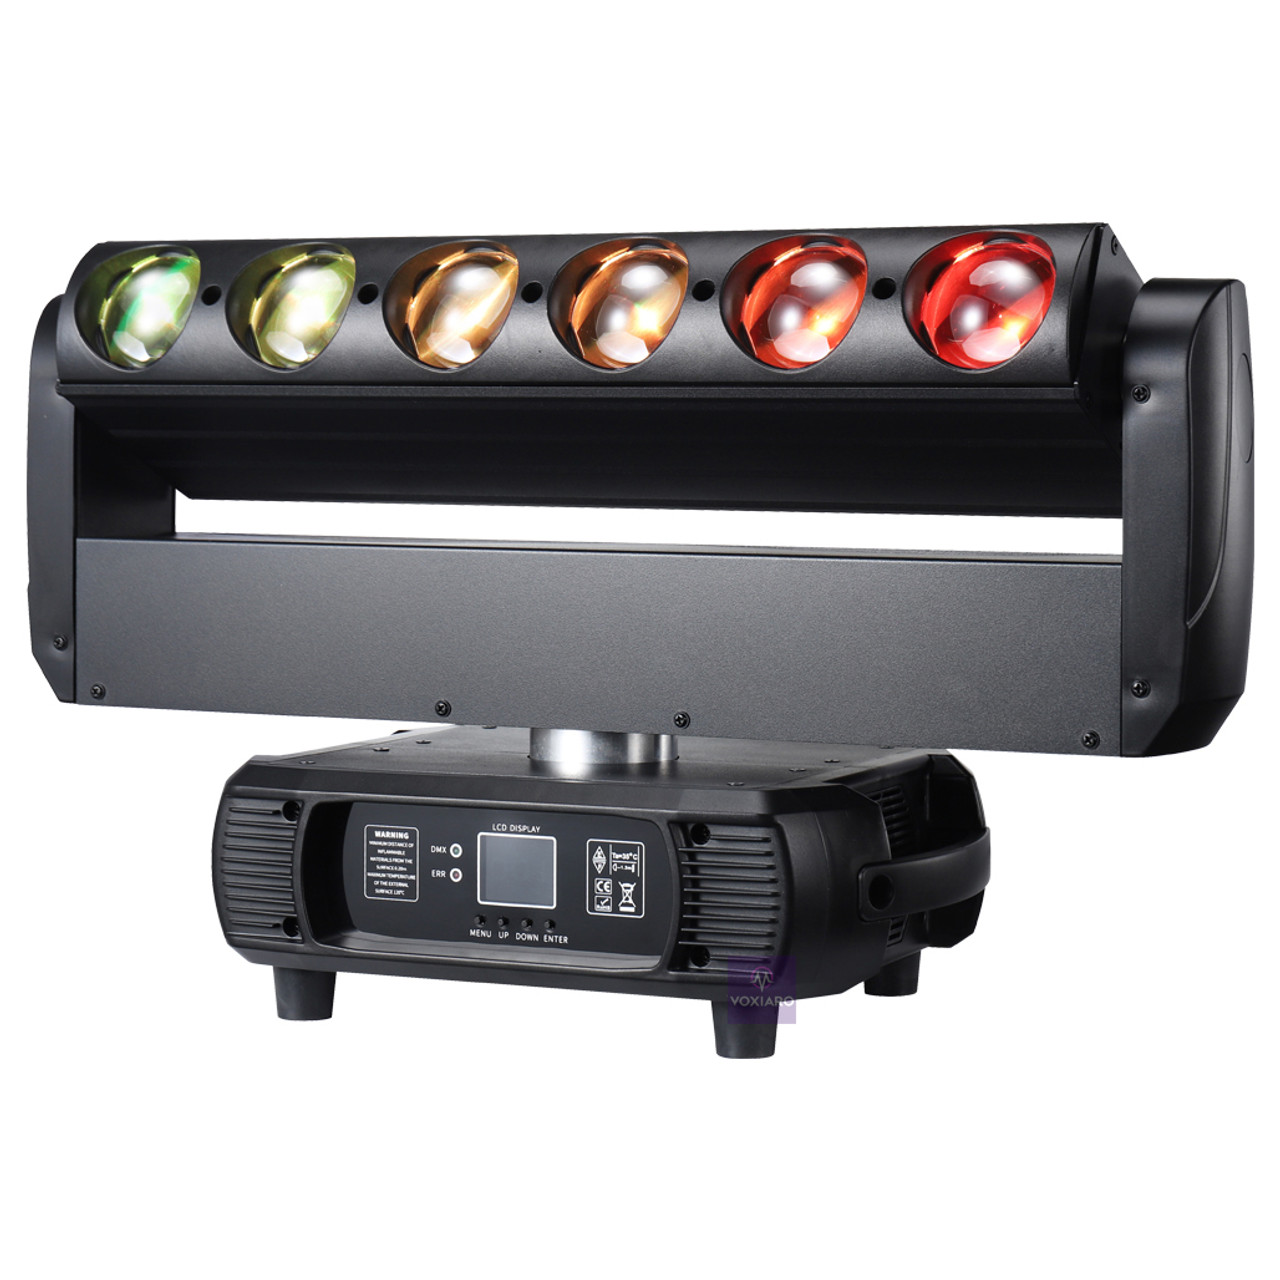 6 x 40W Double-Sided Led Beam Strobe Moving Head Light